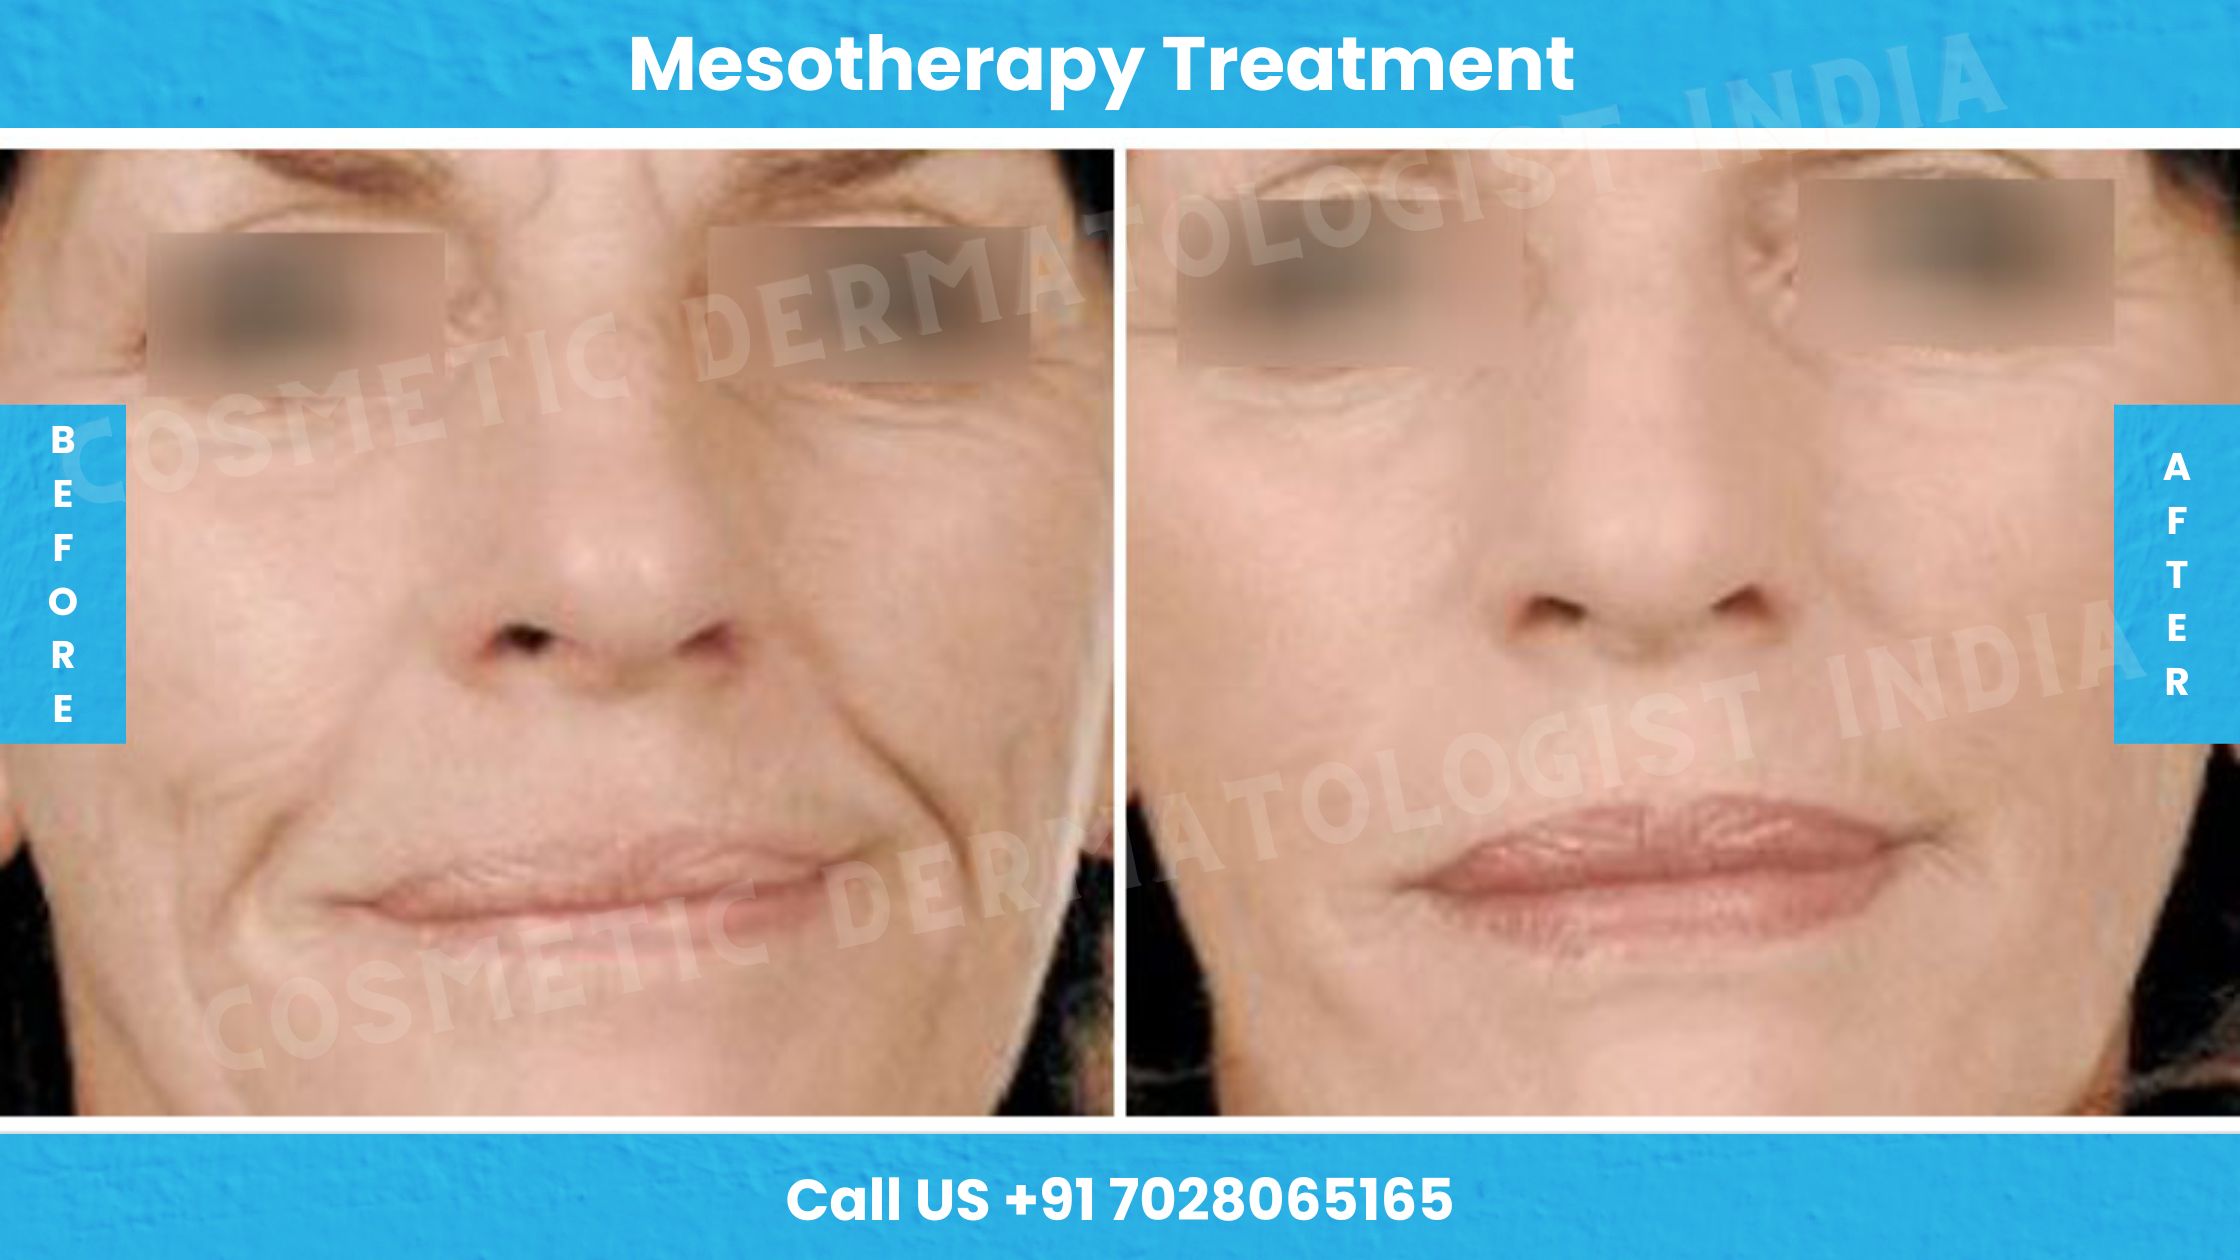 Before and After Images of Mesotherapy Treatment 